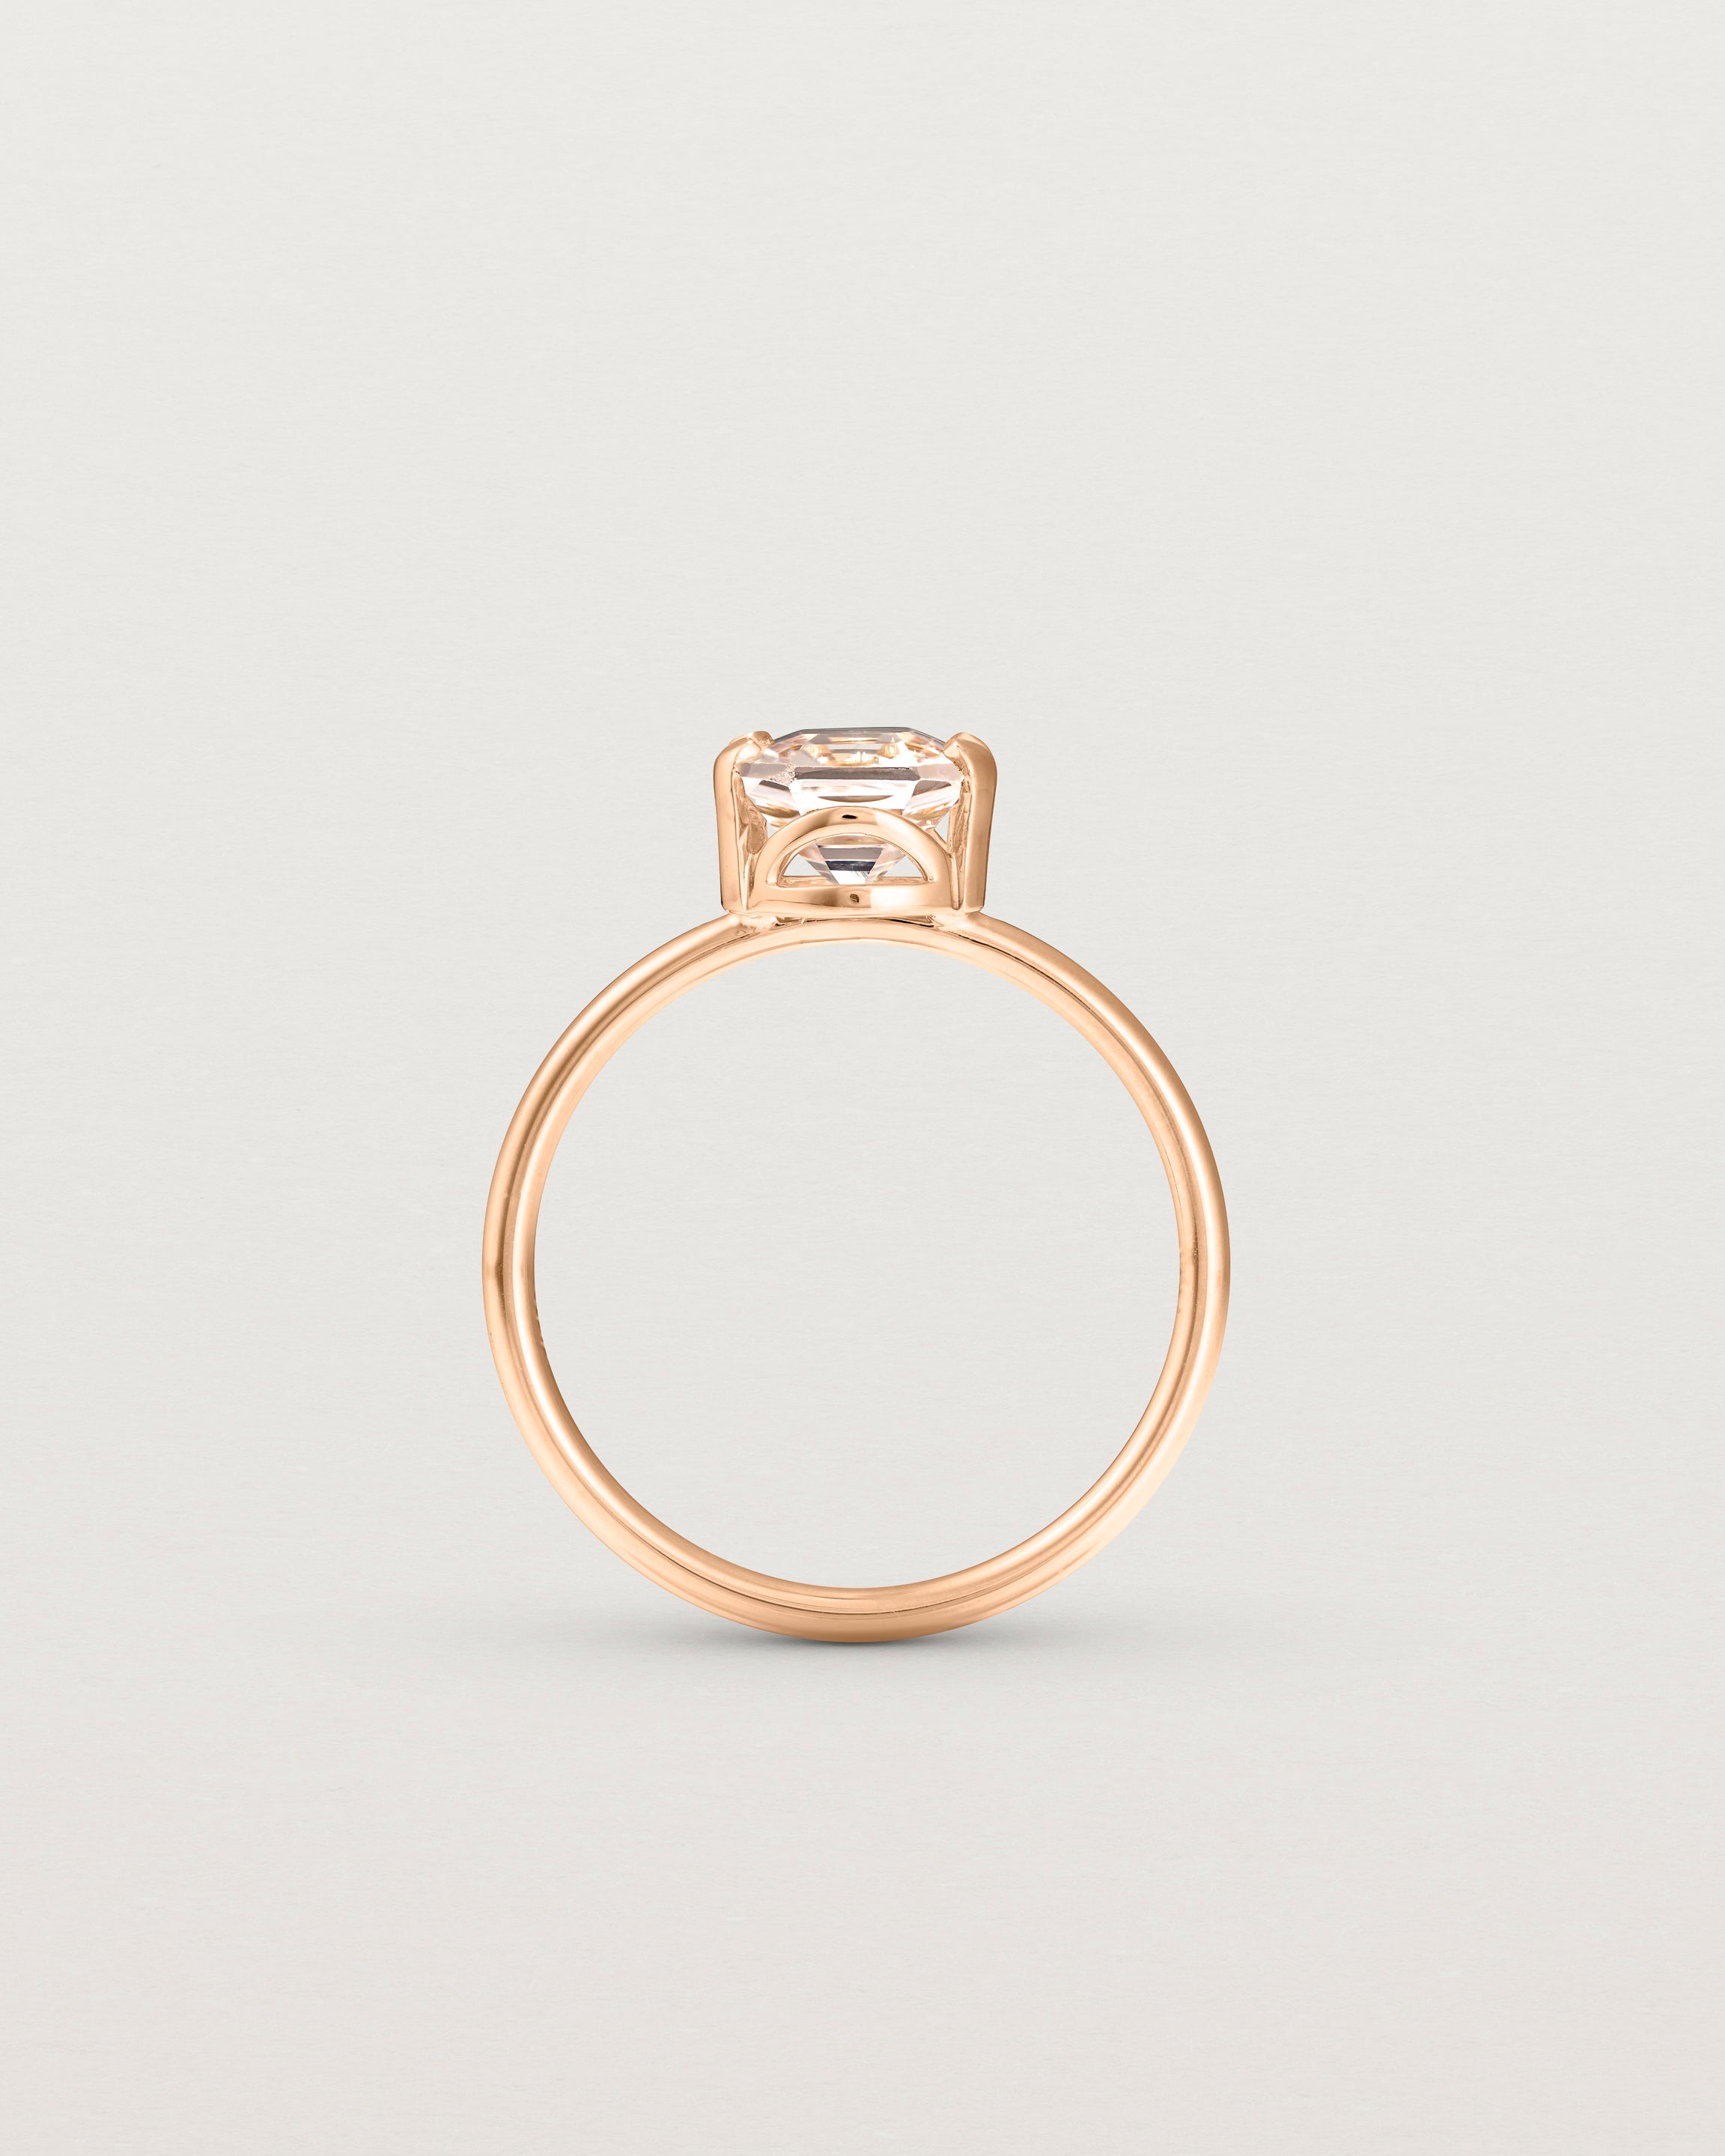 Standing view of the Fei Ring | Morganite rose gold.